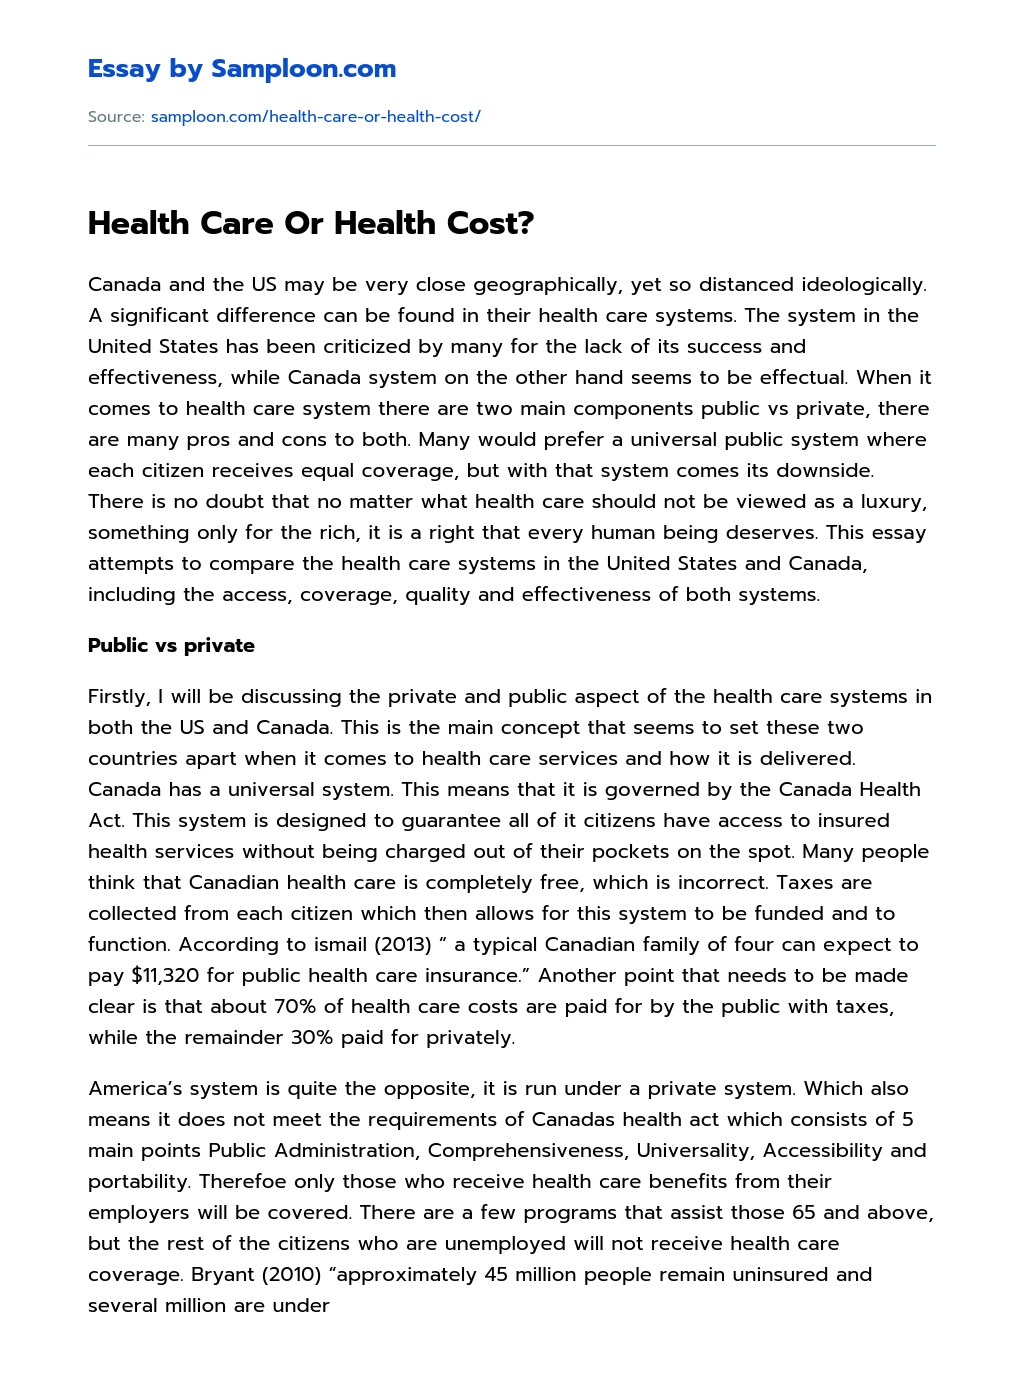 Health Care Or Health Cost? essay